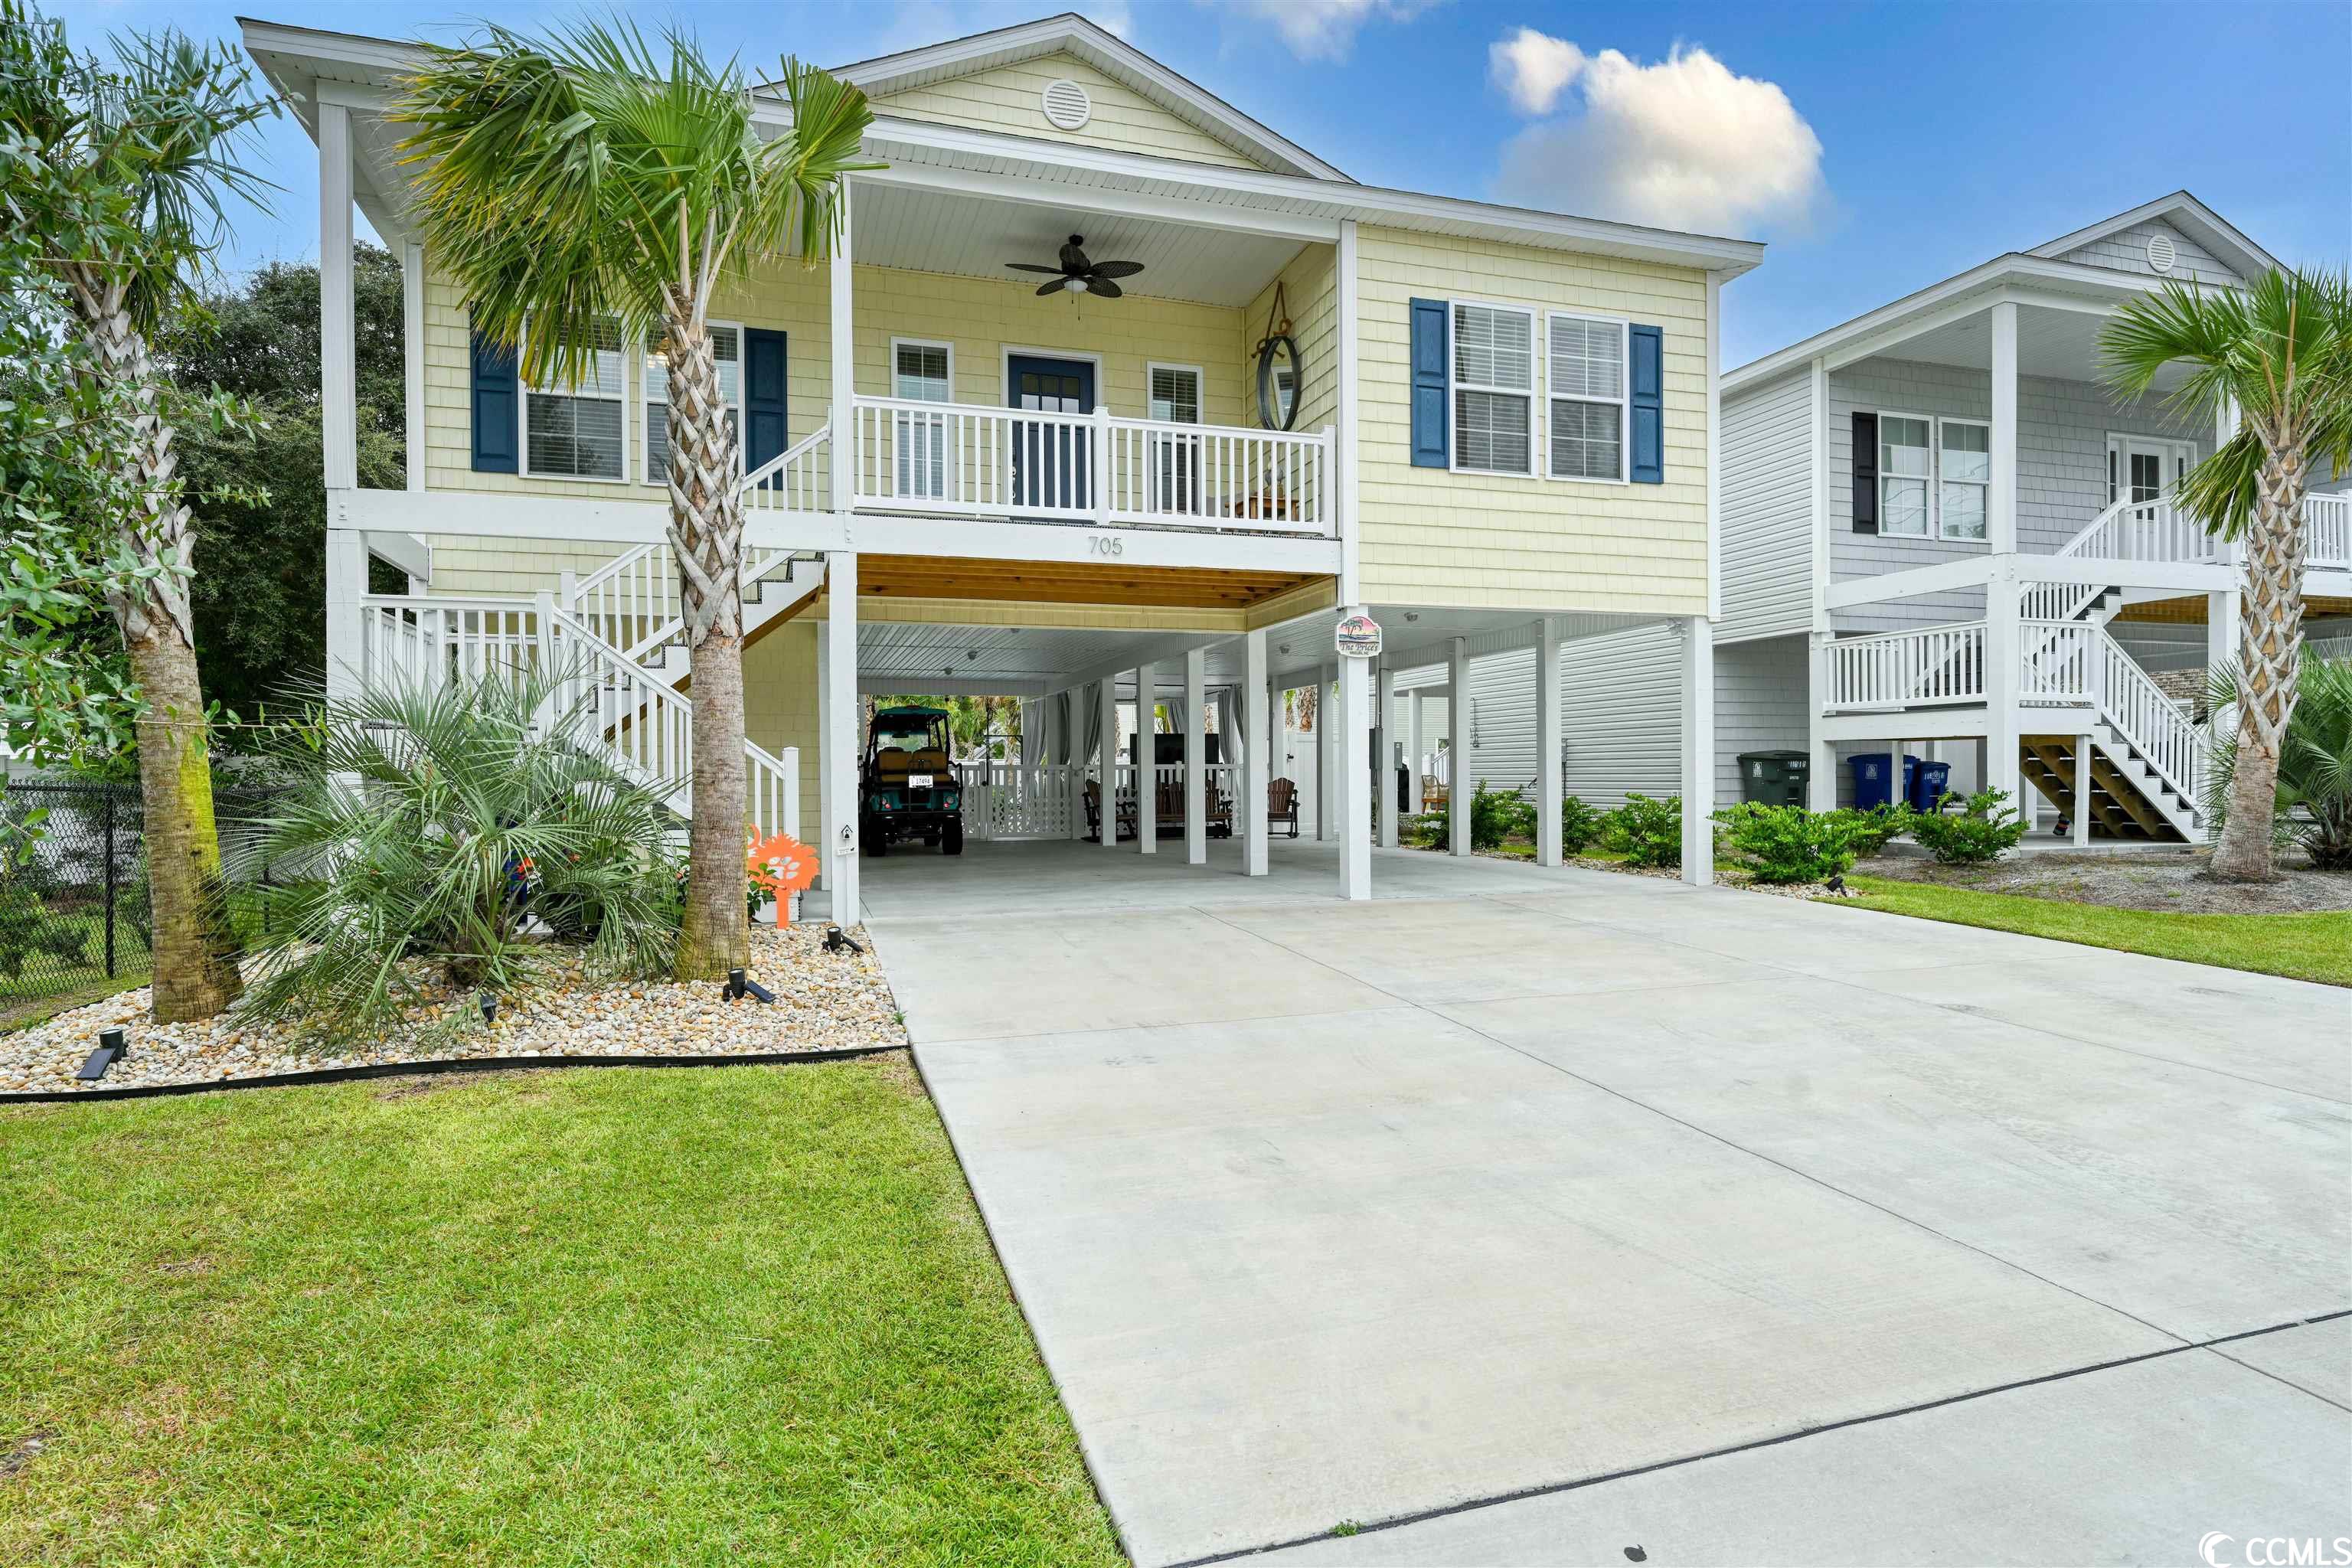 705 19th Ave. S North Myrtle Beach, SC 29582